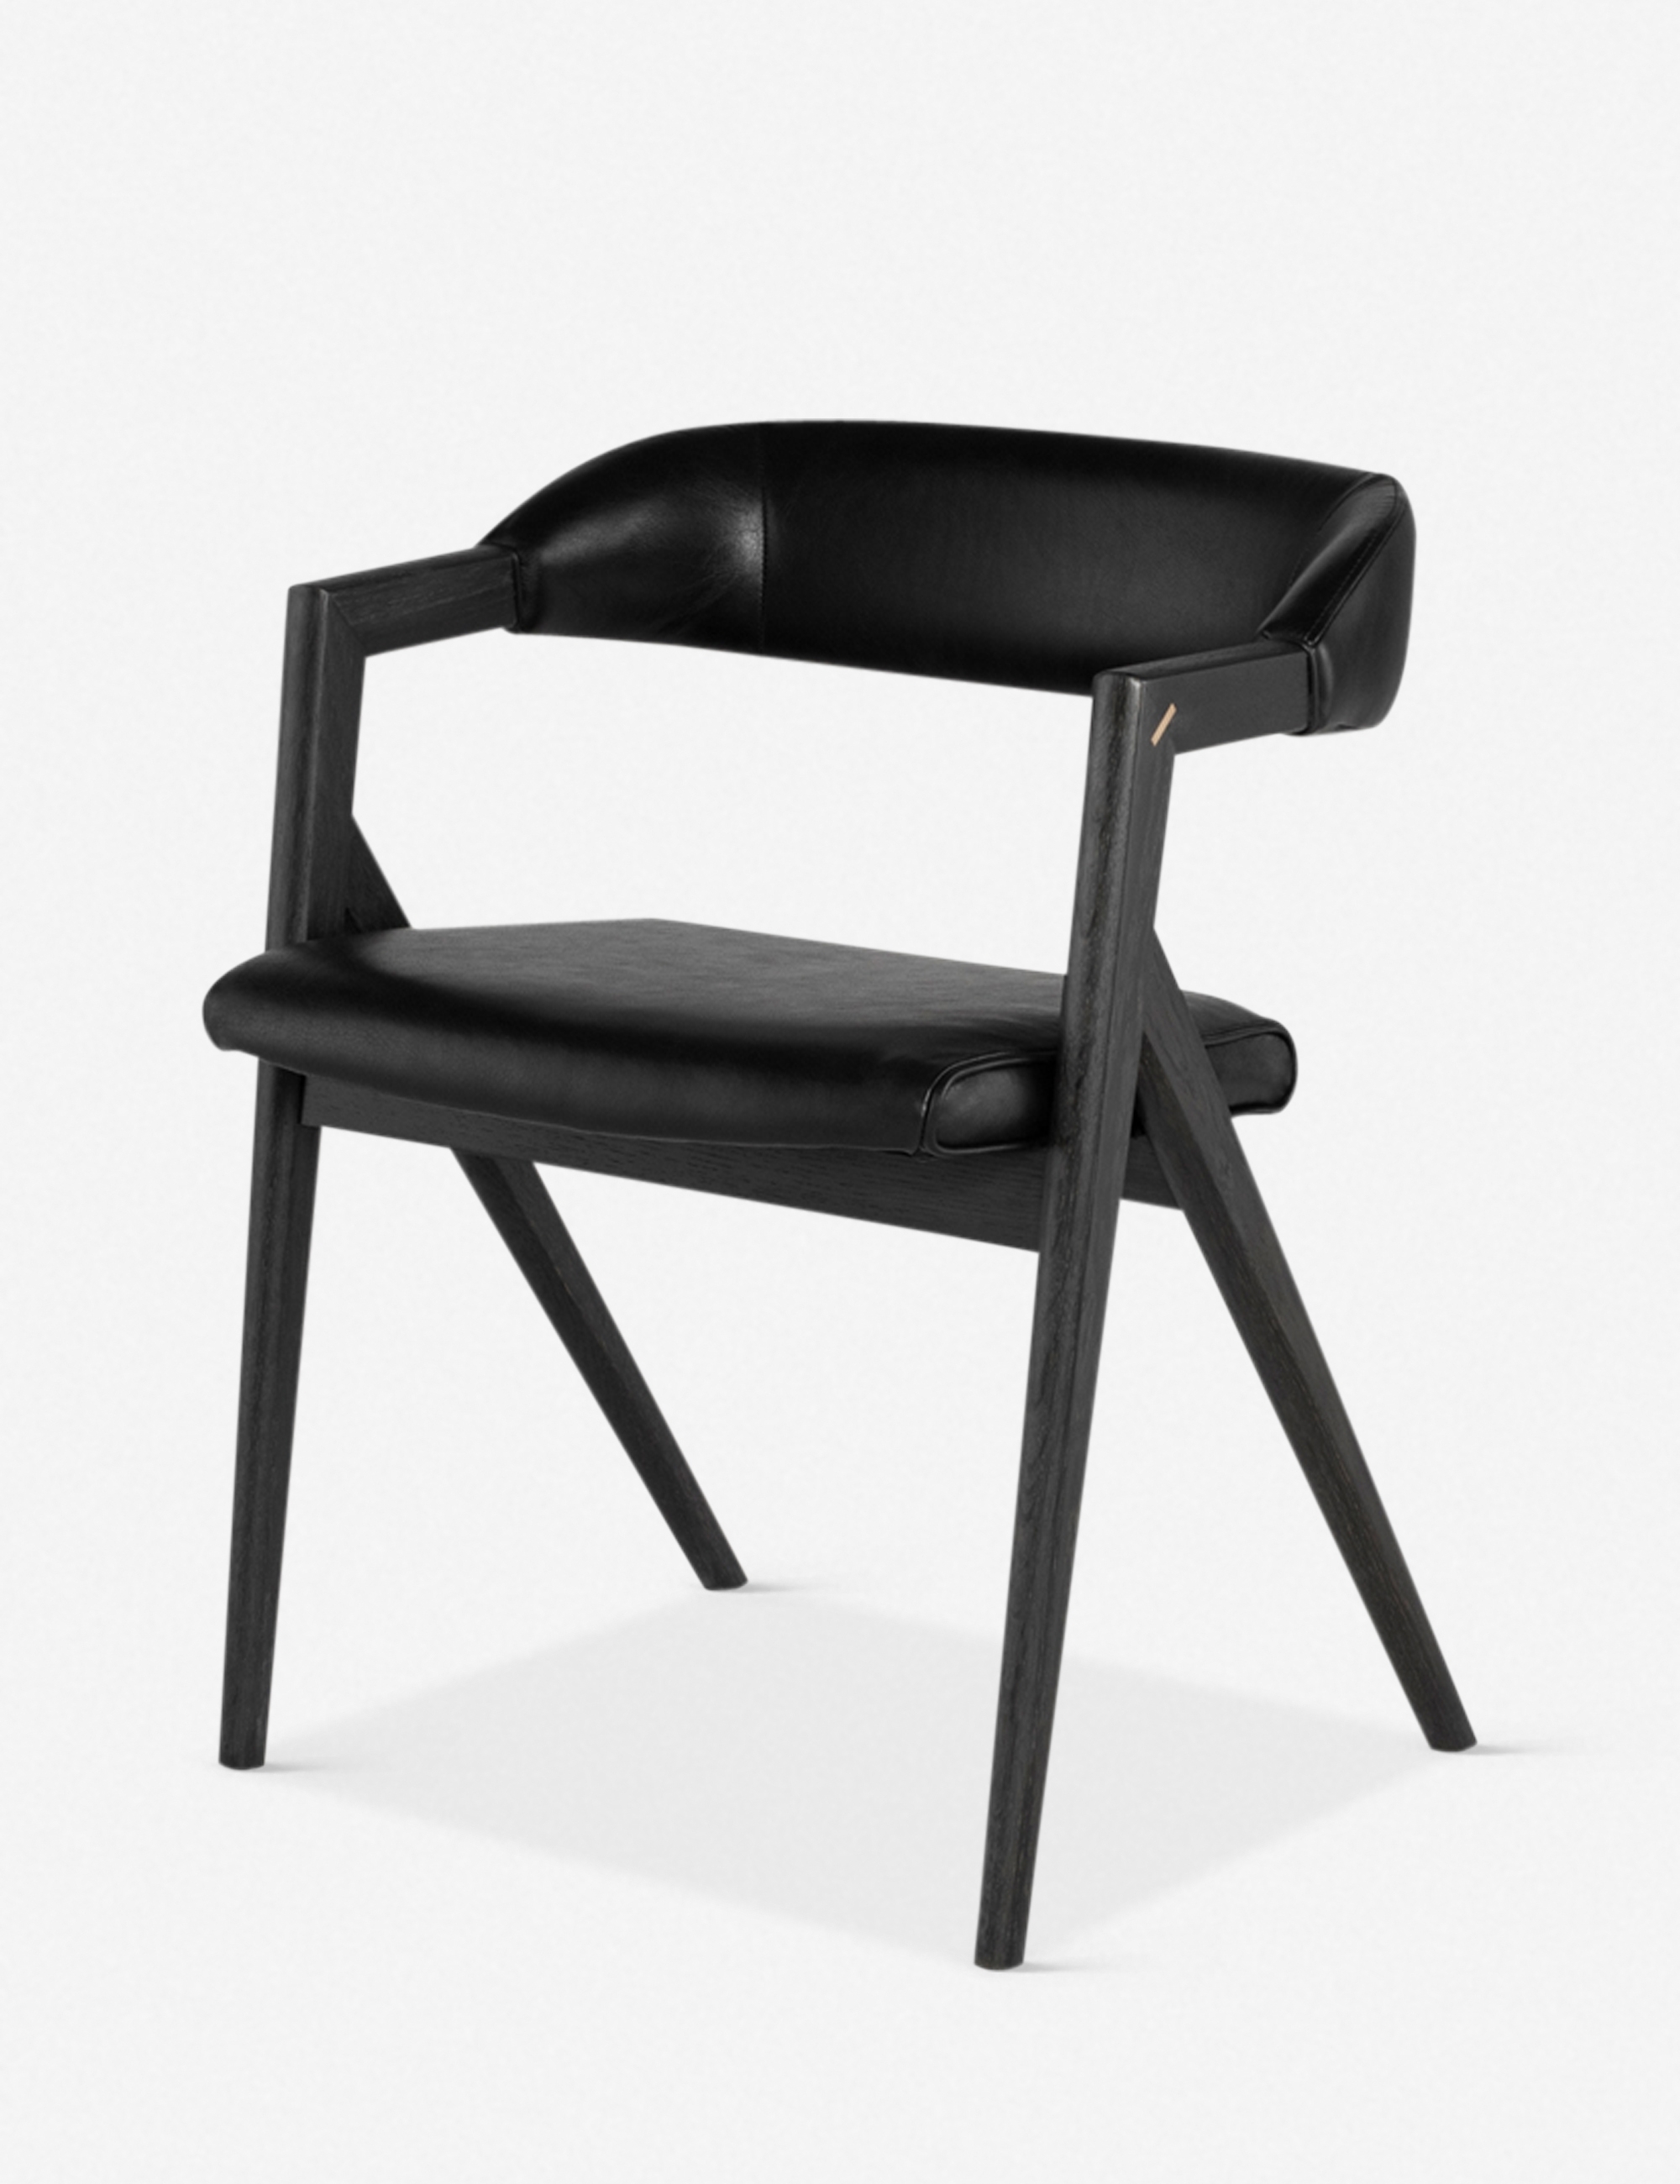 Sandia Leather Dining Chair - Image 1